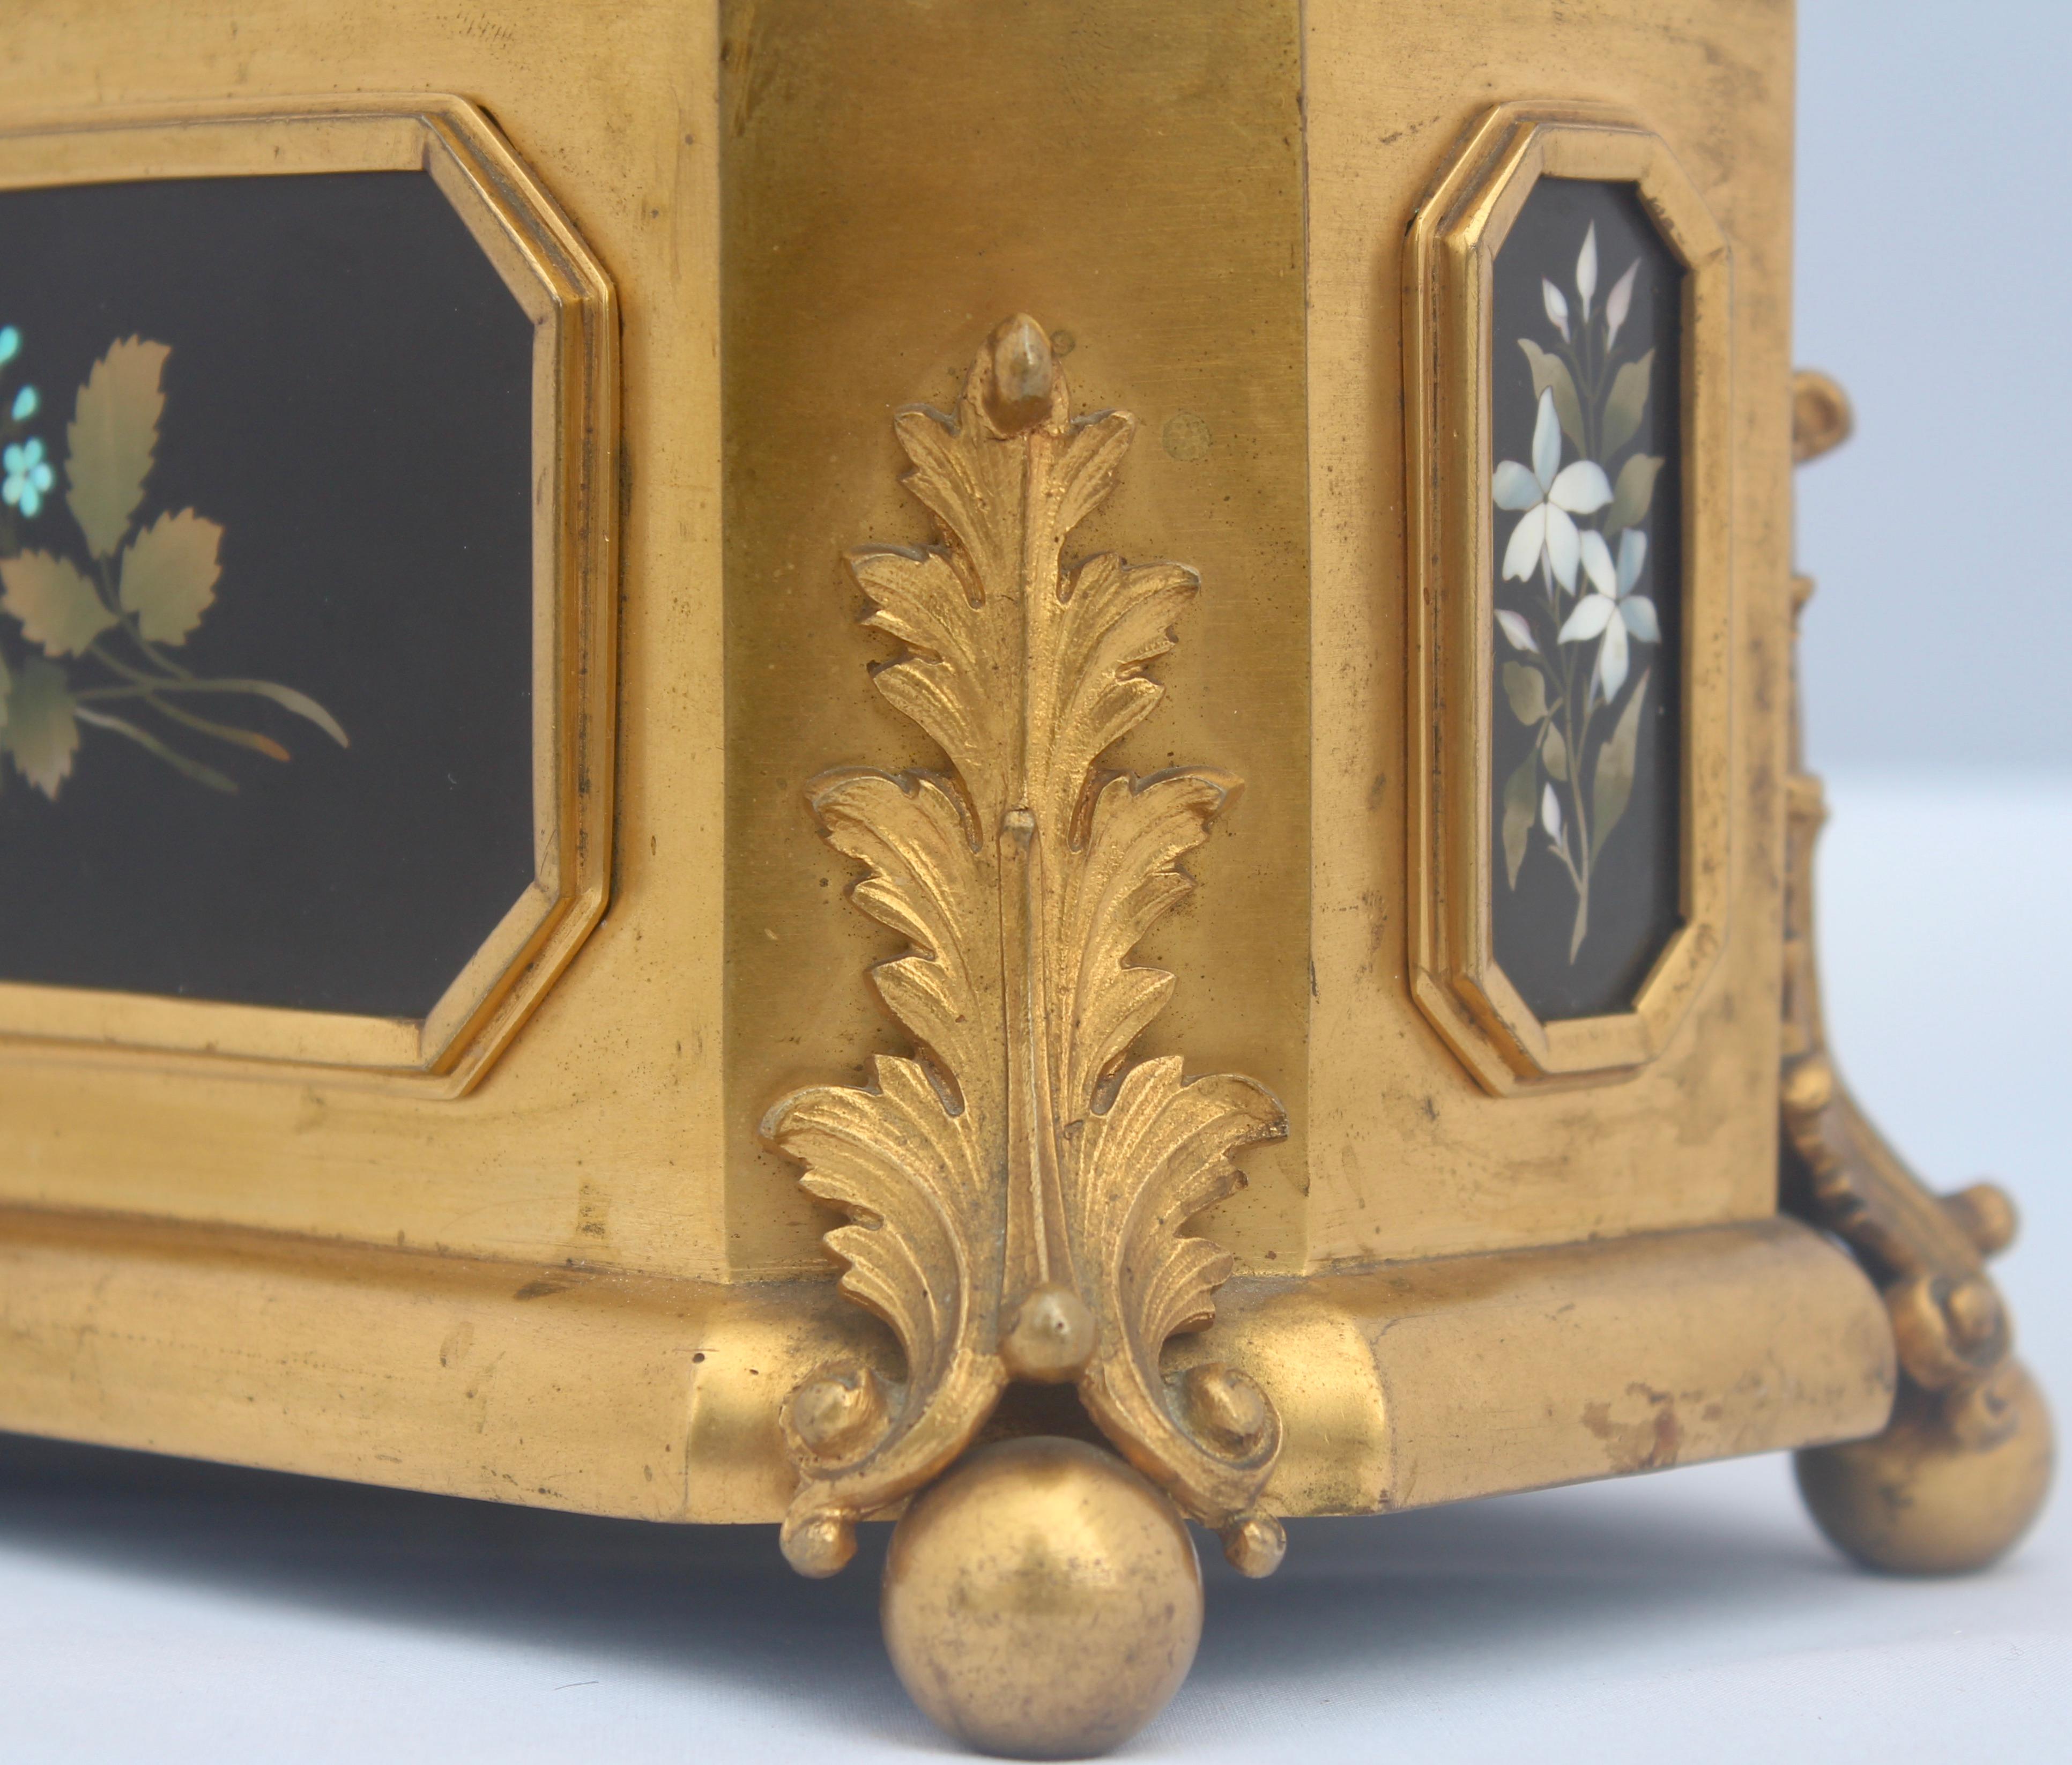 French 19th Century Gilt-Bronze and Pietra Dura Inset Jewelry Casket 3